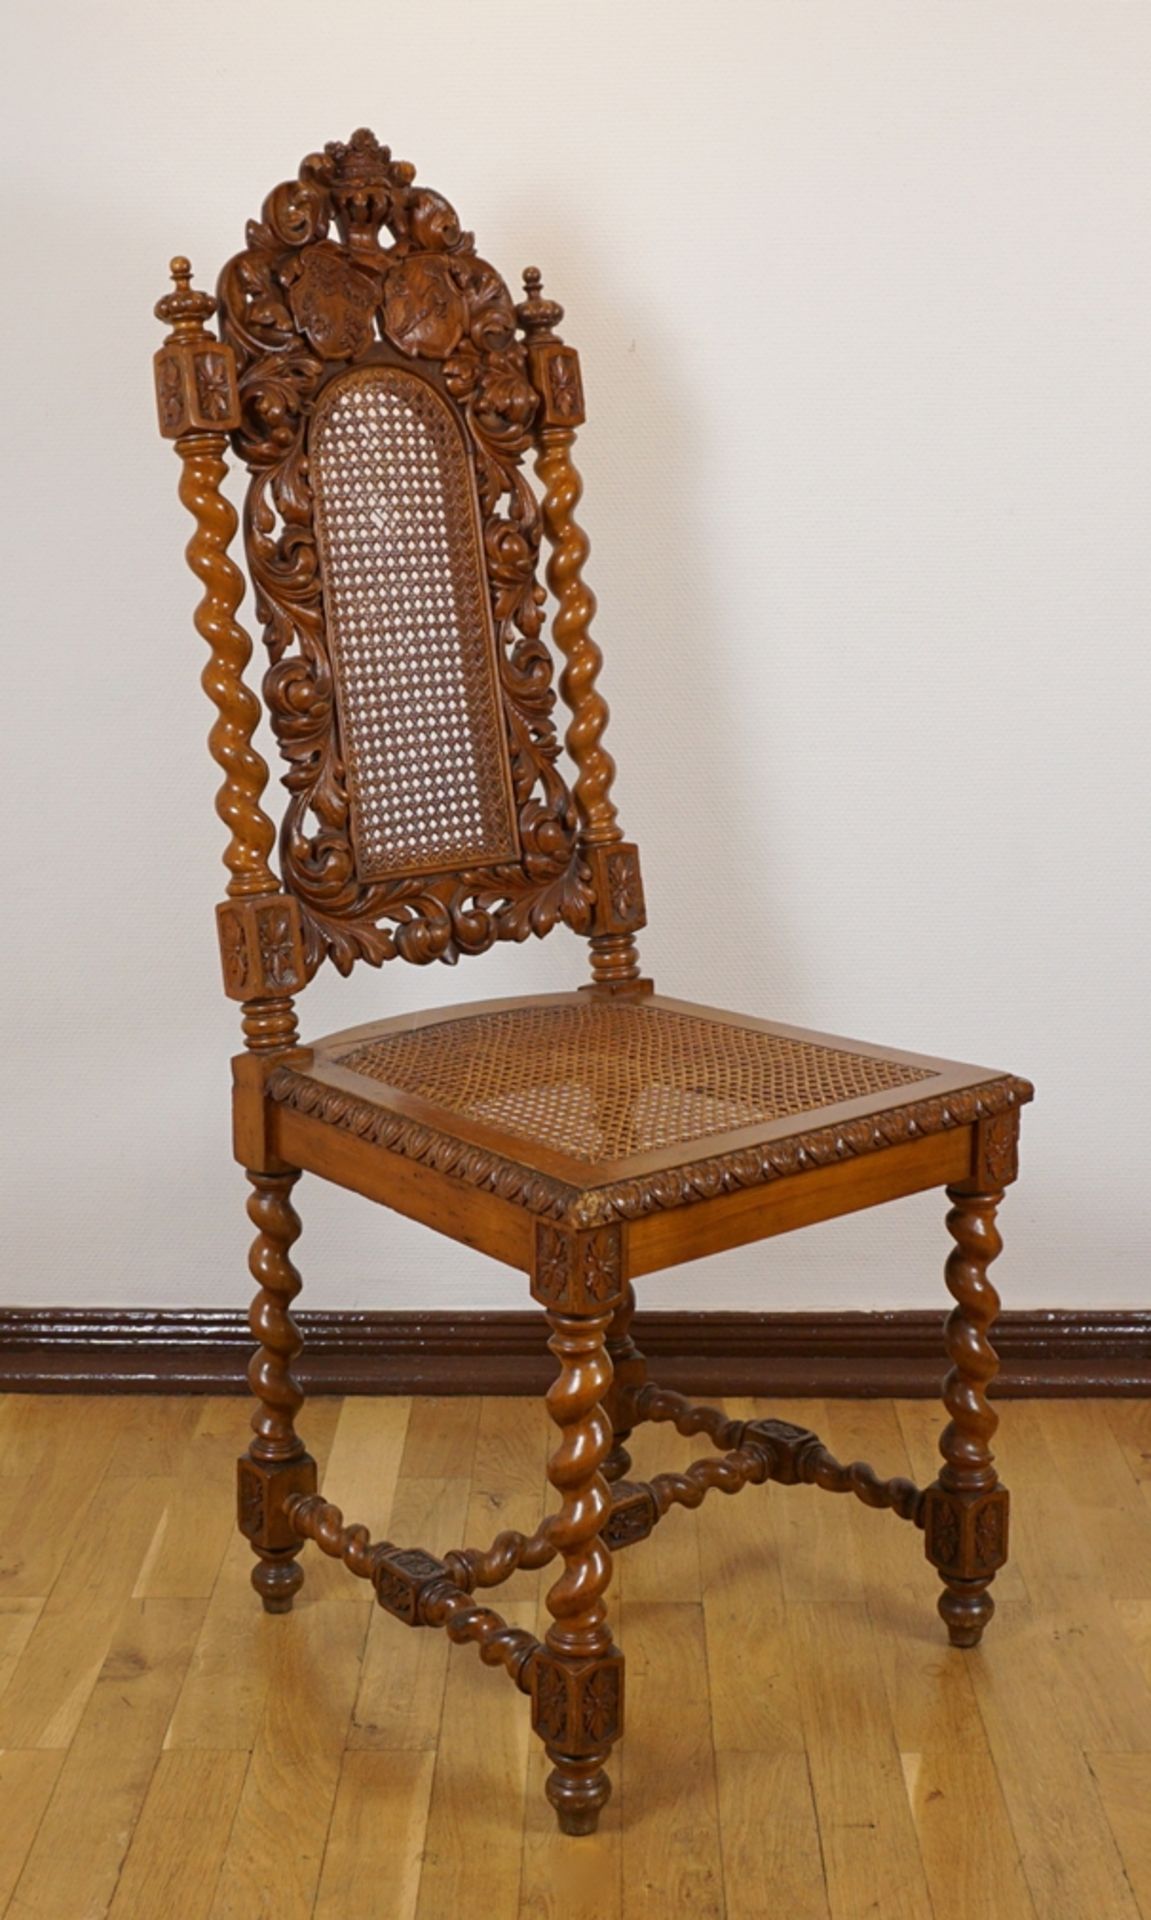 Historicism chair with coats of arms, end of 19th century